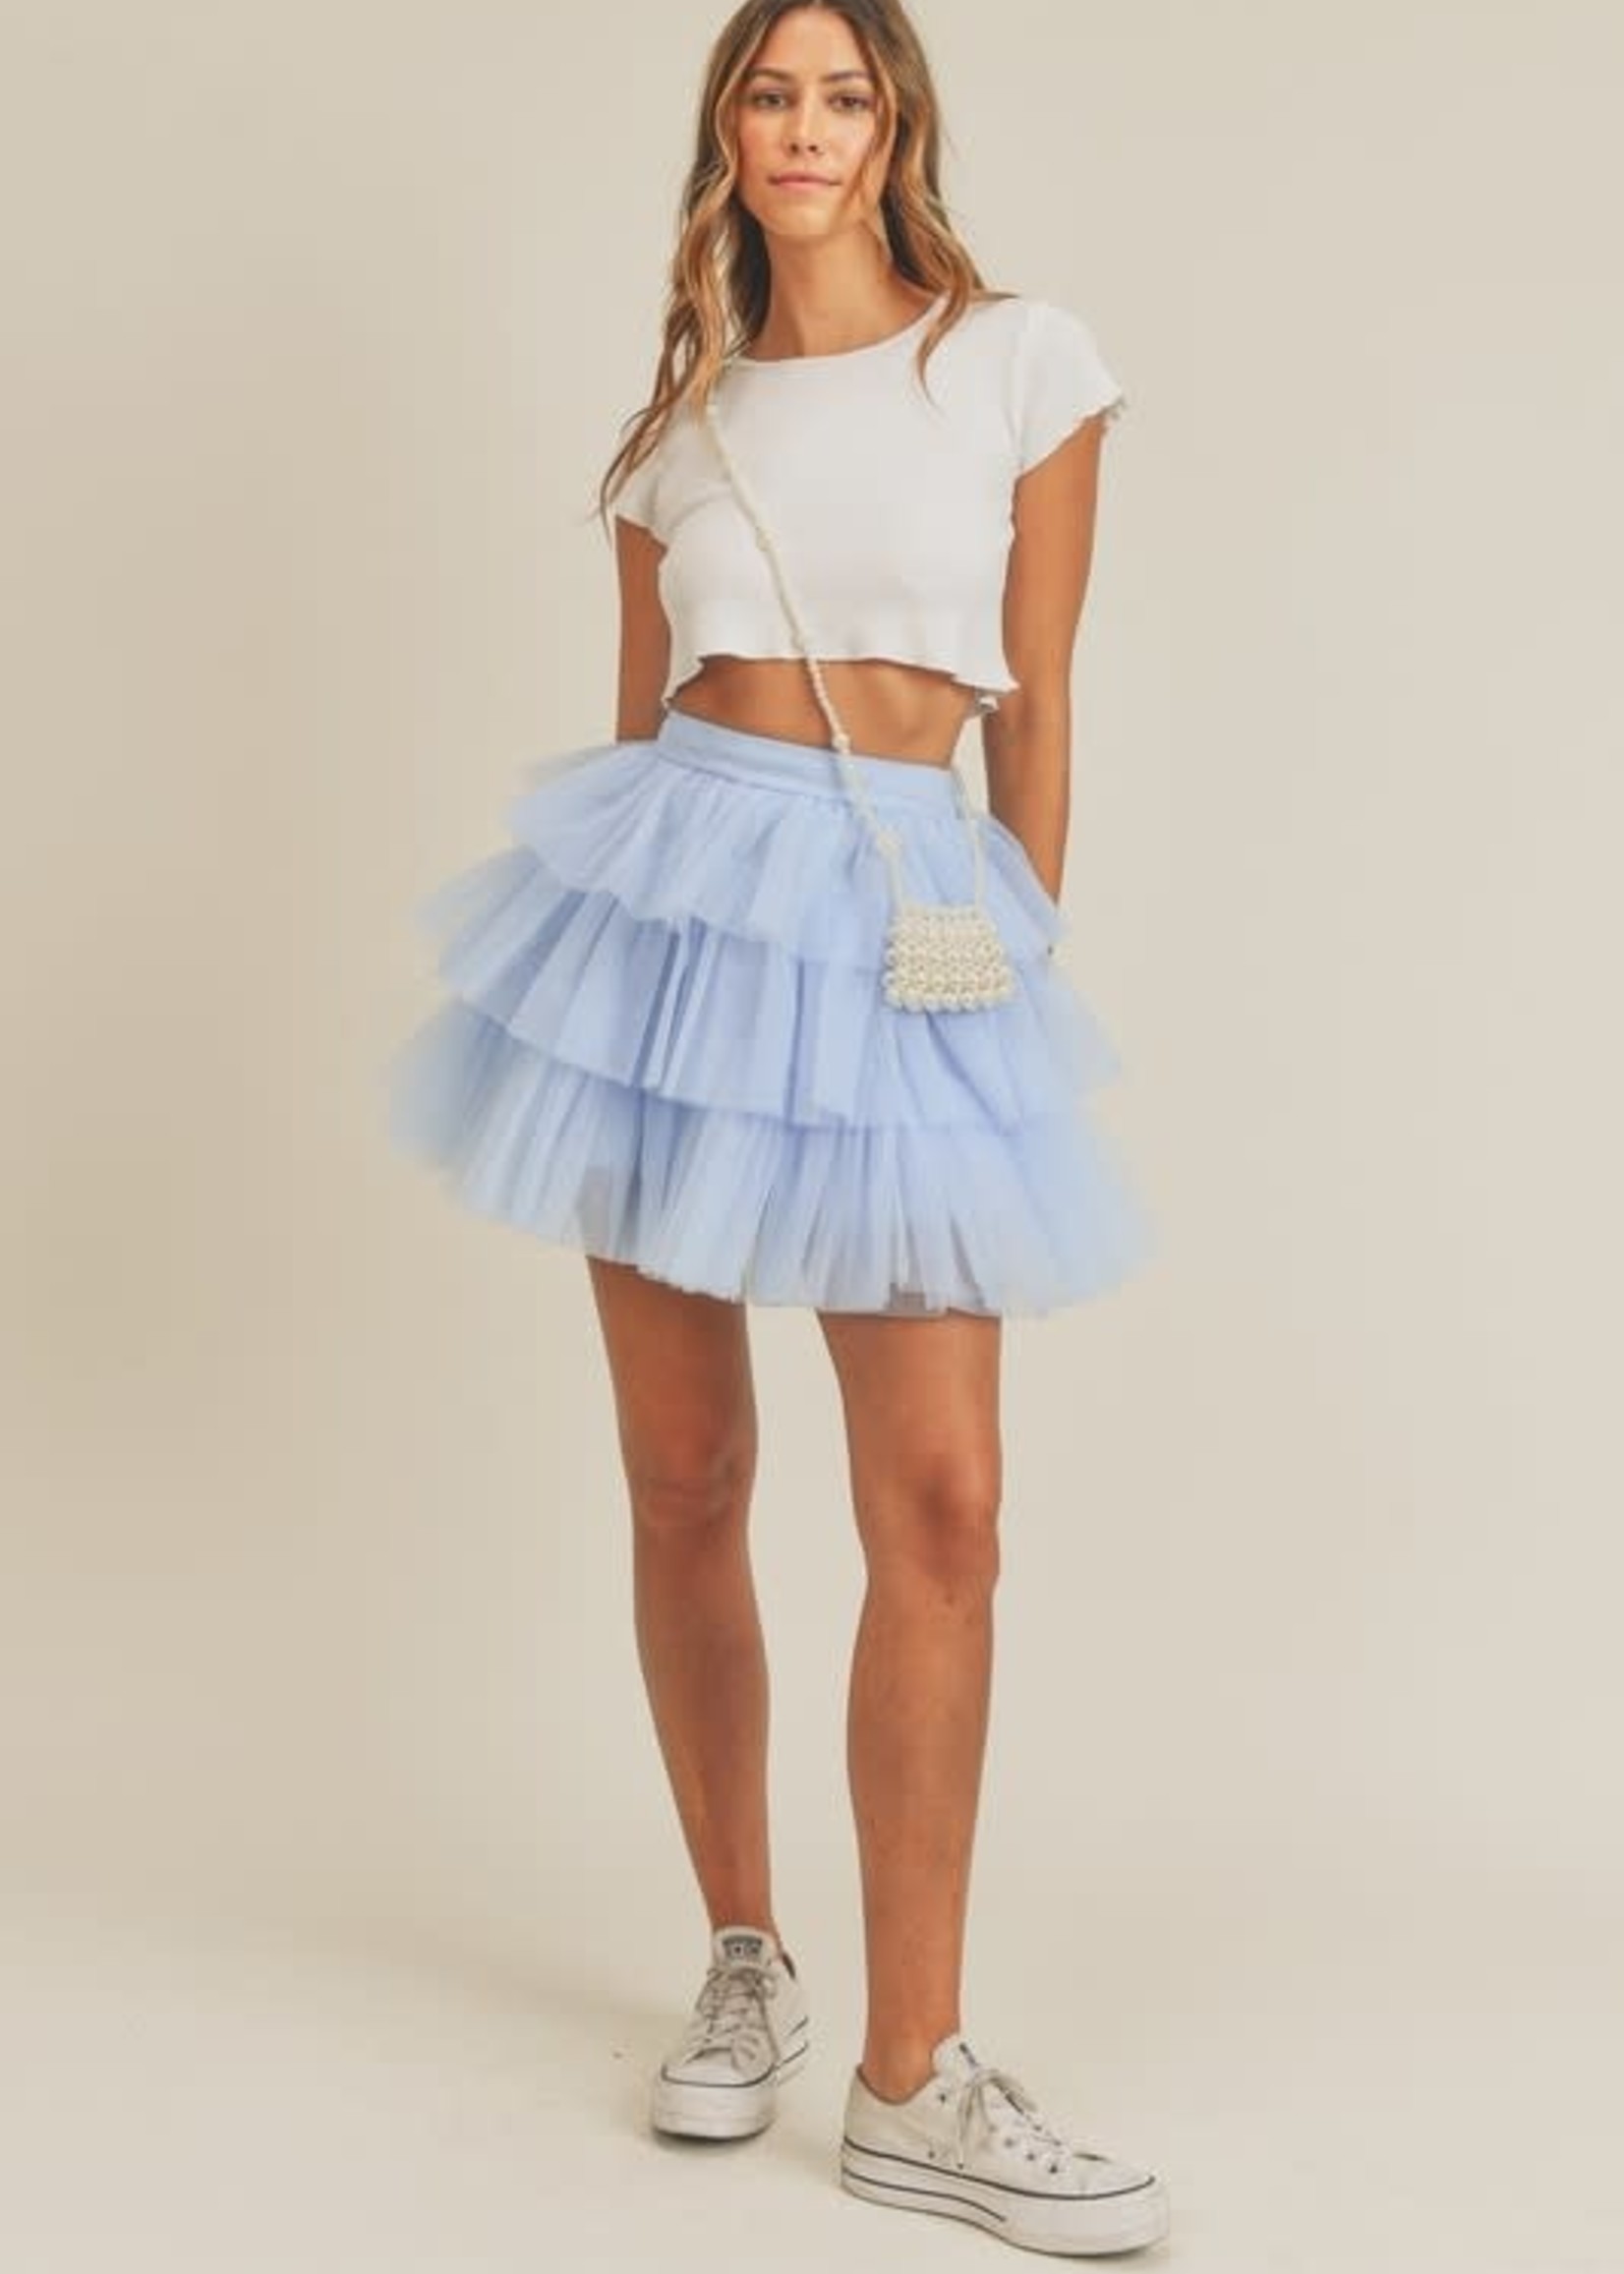 Let's Tulle Around Skirt